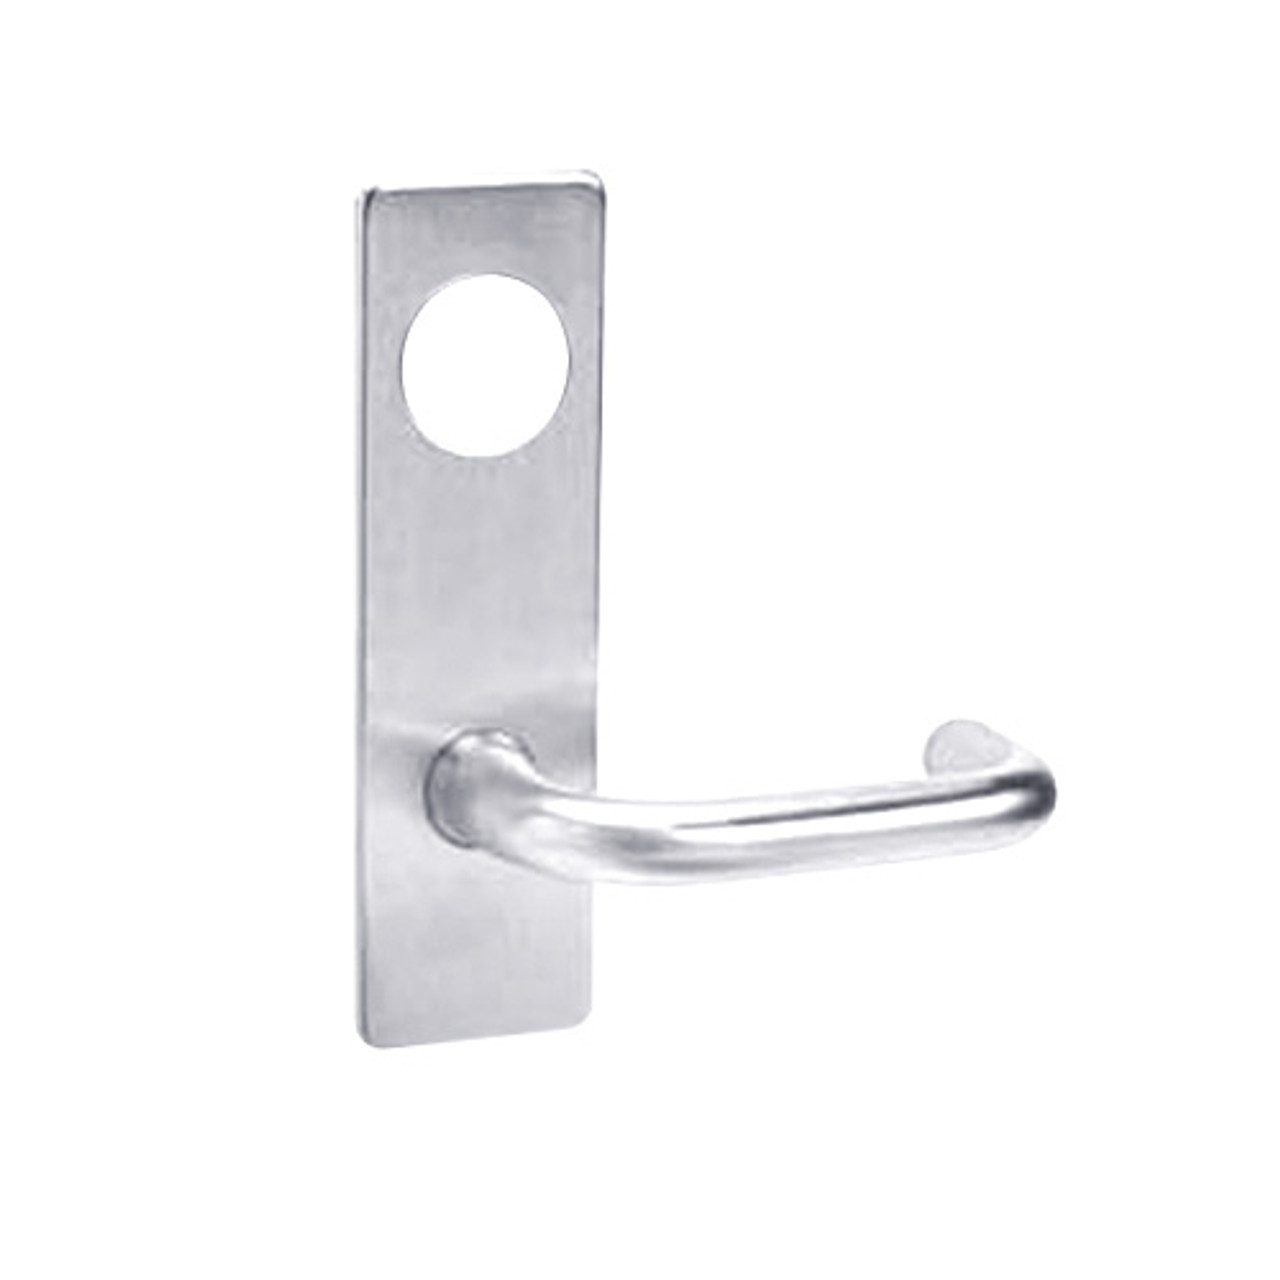 ML2054-LSP-625-CL6 Corbin Russwin ML2000 Series IC 6-Pin Less Core Mortise Entrance Locksets with Lustra Lever in Bright Chrome